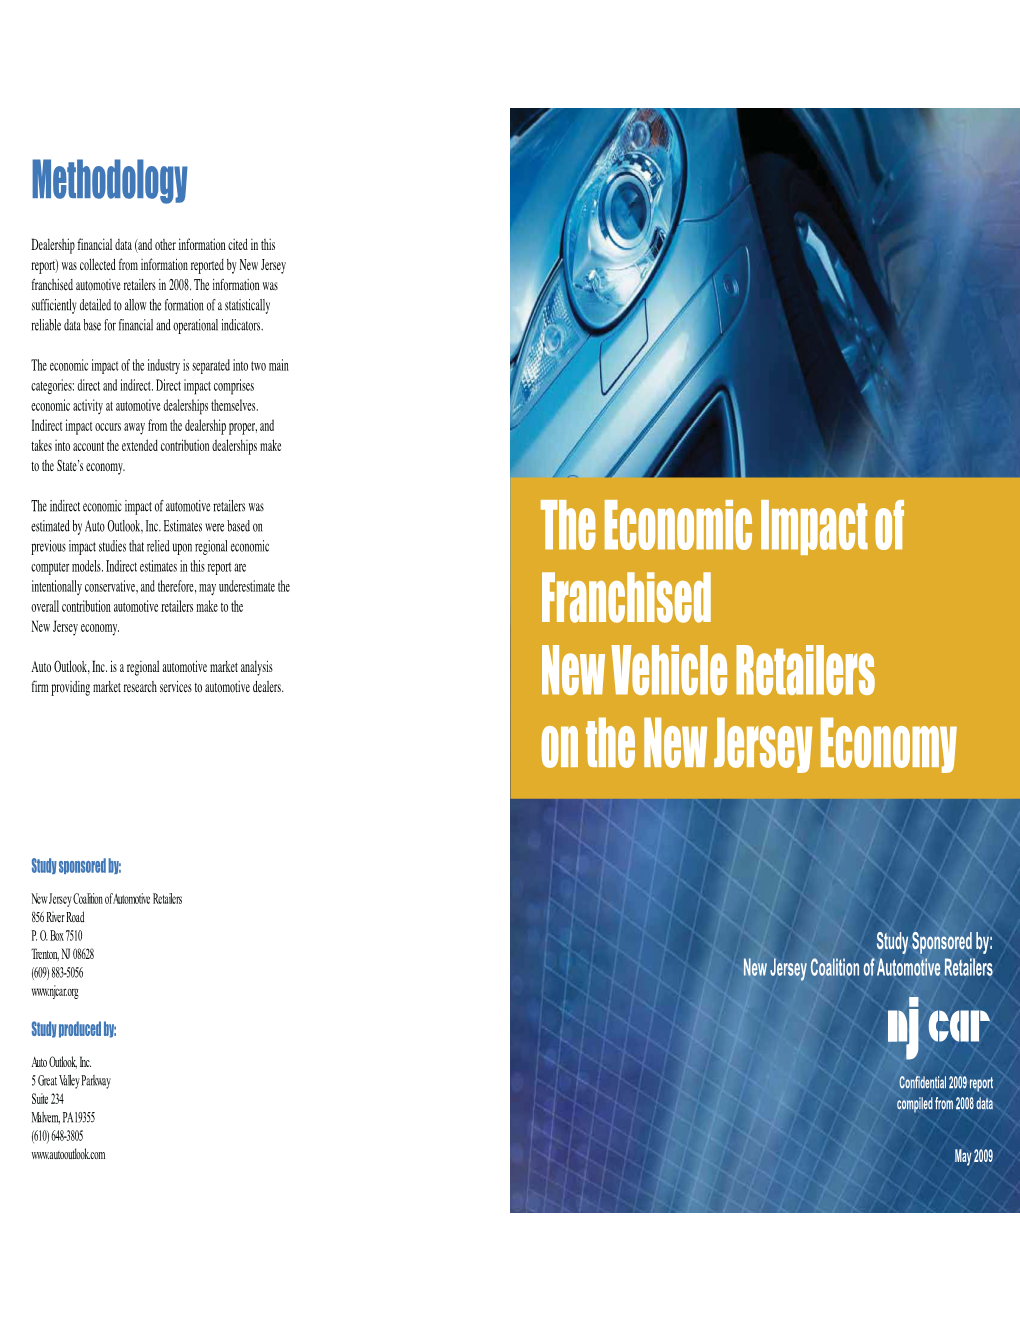 The Economic Impact of Franchised New Vehicle Retailers on the New